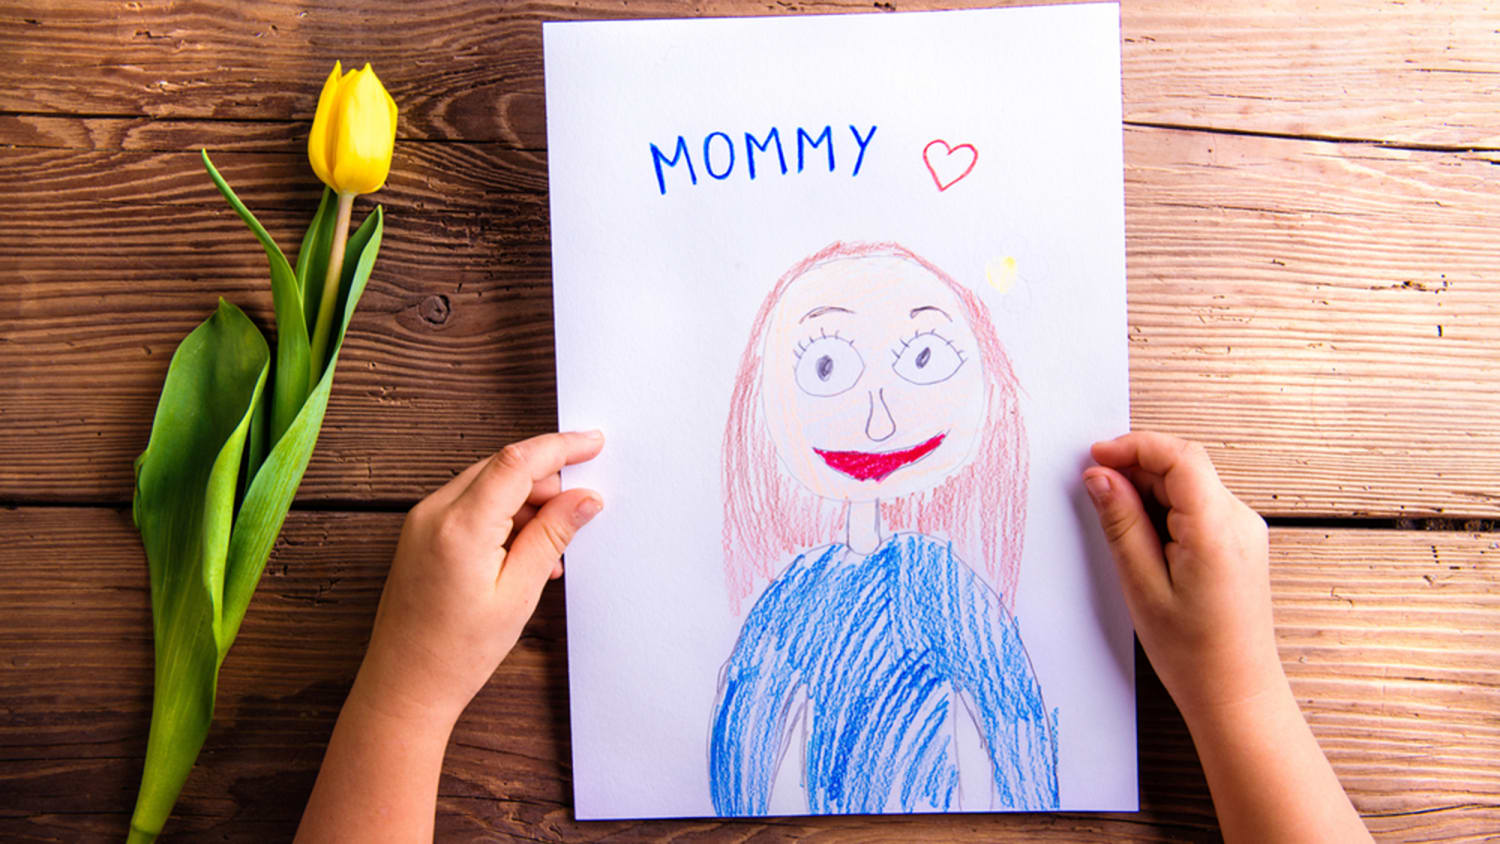 13 Gifts To Get Your Mom This Mother's Day (Based on survey results of what  she really wants)! - Must Have Mom